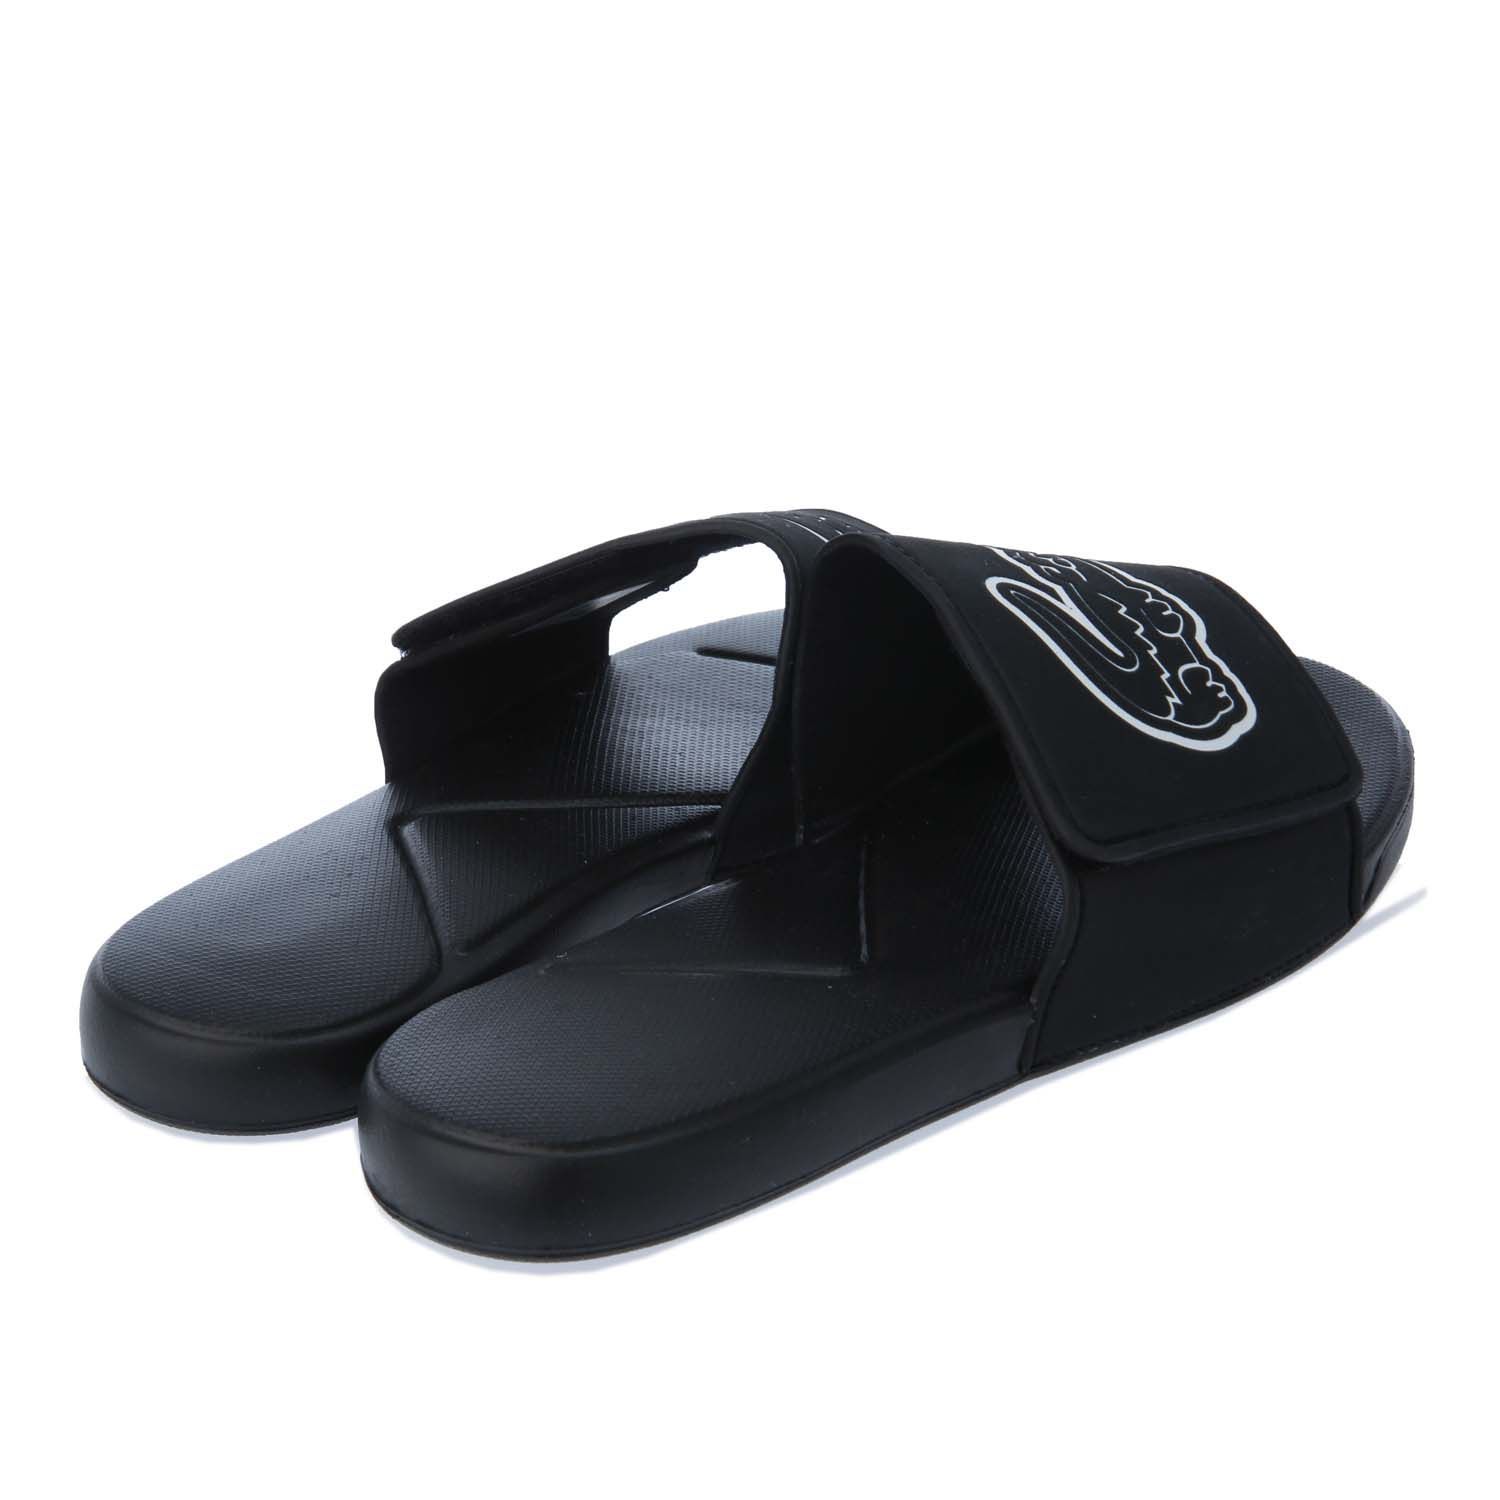 Junior Lacoste L.30 Strap Slide in black.- Synthetic uppers.- Slip on fastening.- Adjustable hook and loop strap ensures.- Oversized debossed crocodile branding on the strap.- Injection-Moulded Eva outsole.- Rubber sole.- Synthetic upper  Textile and synthetic lining  Synthetic sole.- Ref: 741CUJ0010312